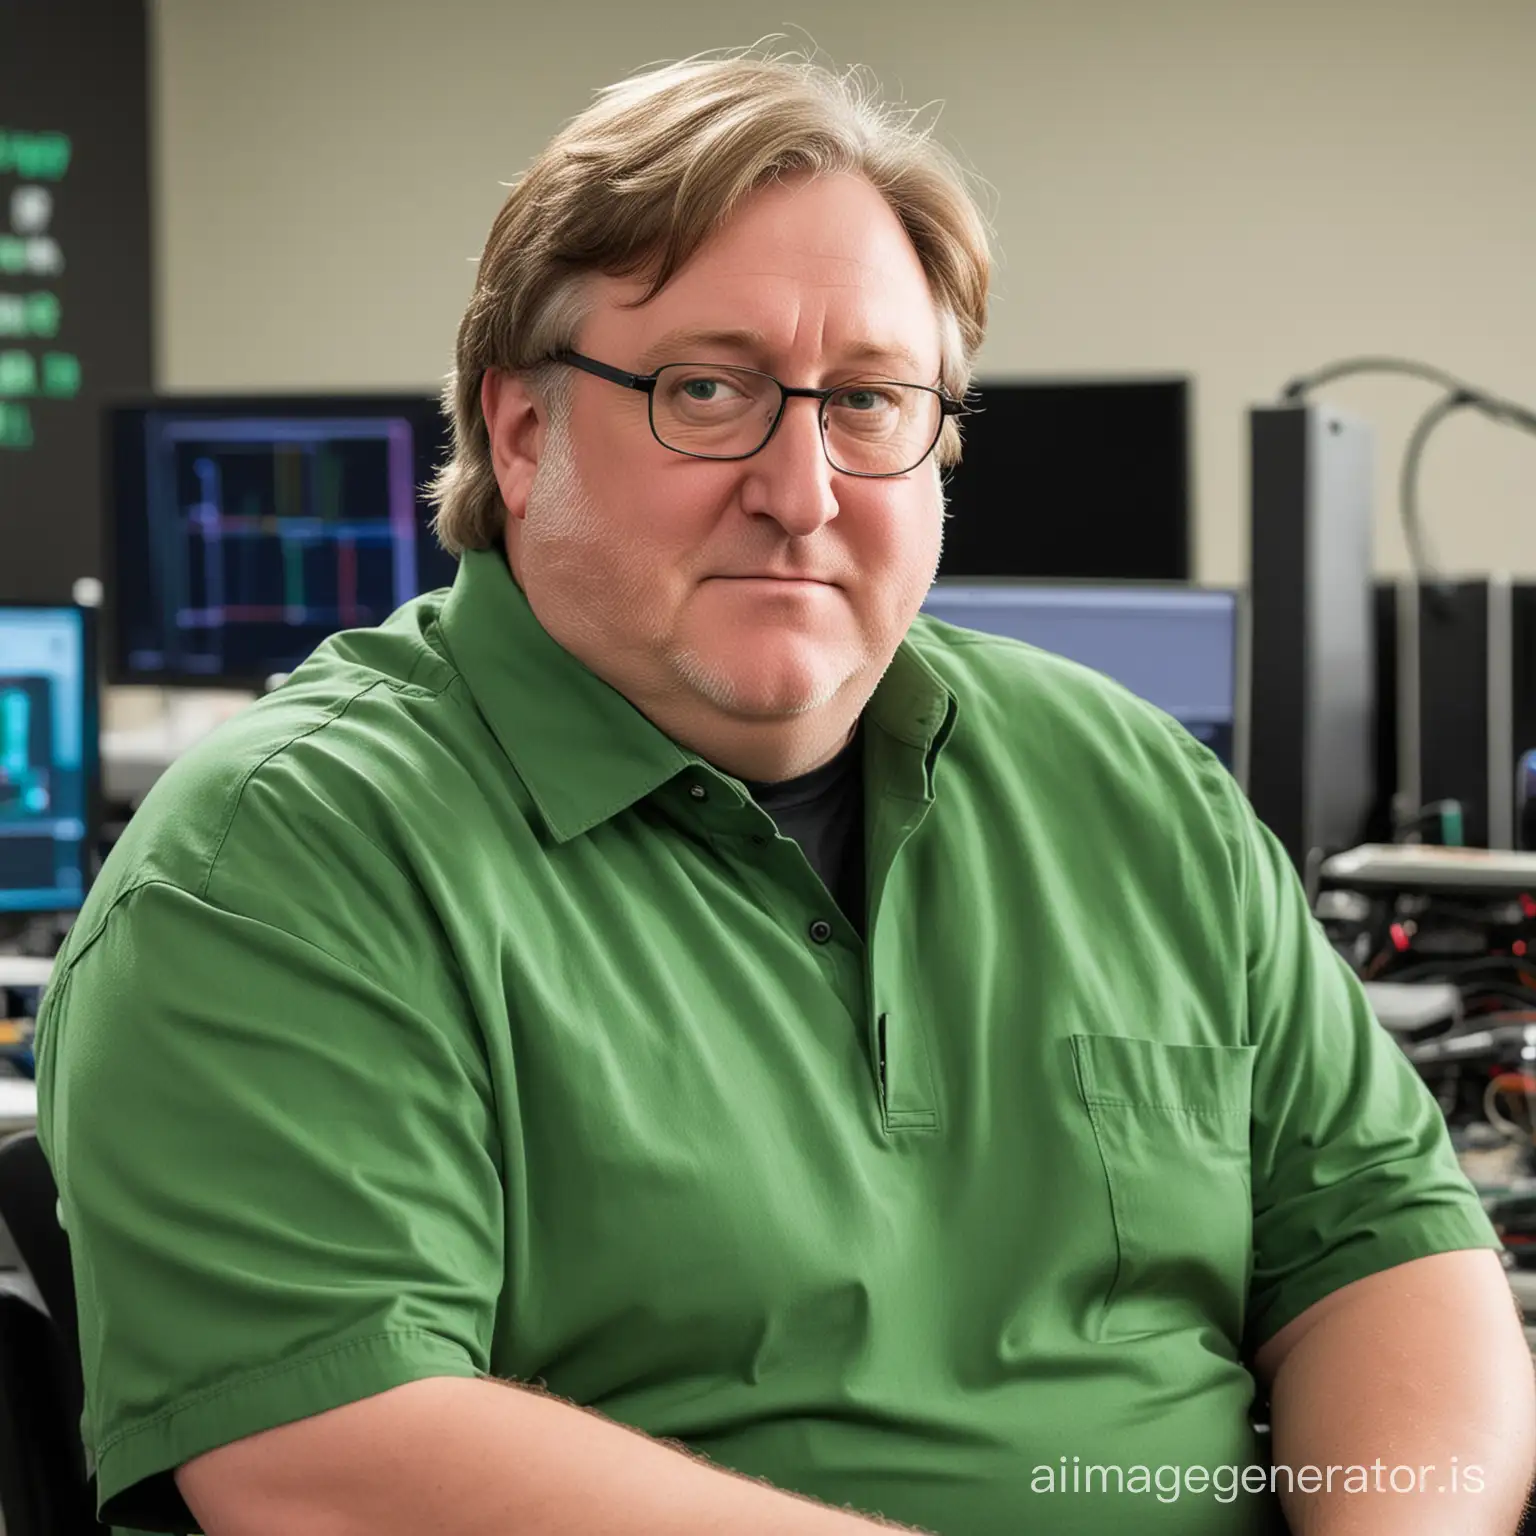 gabe newell wearing a green shirt with slicked back hair sitting in front of out of focus lab equipment